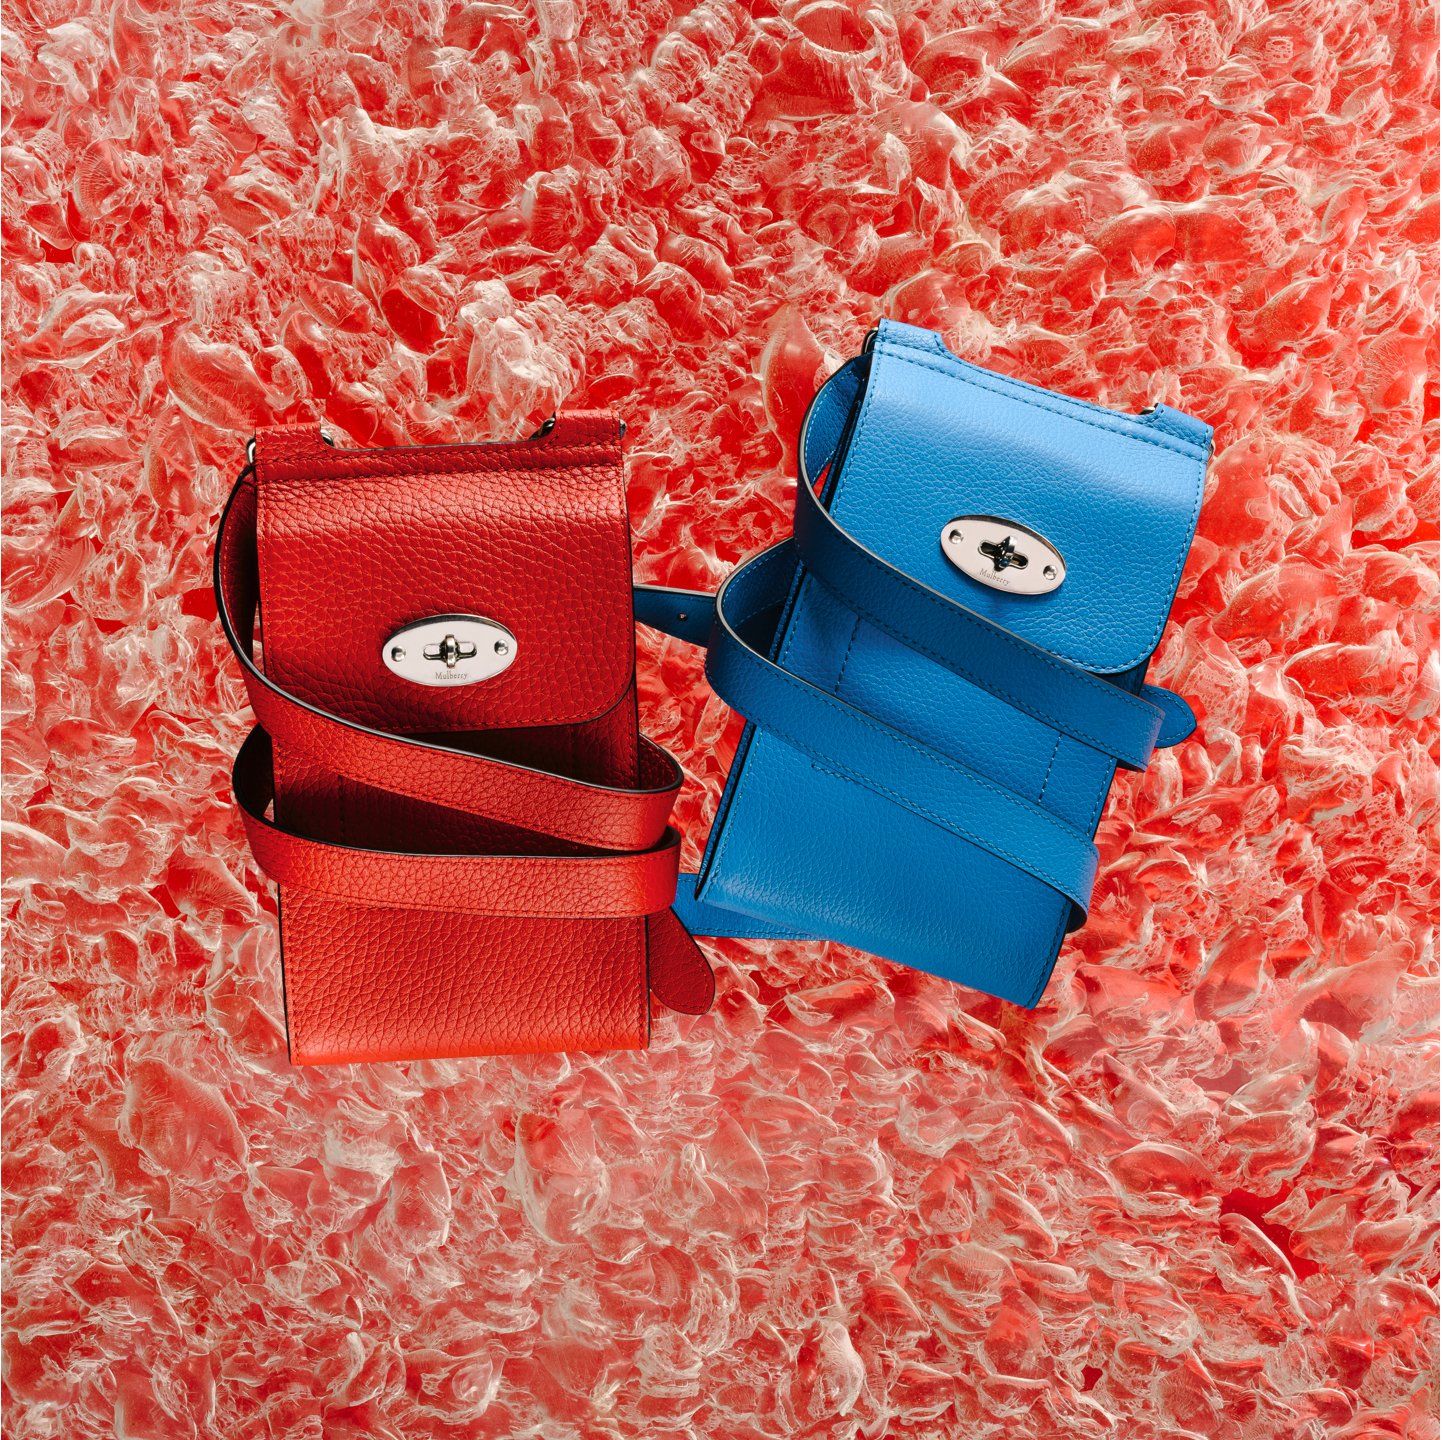 Two Mulberry Mini Antony bags in red and blue